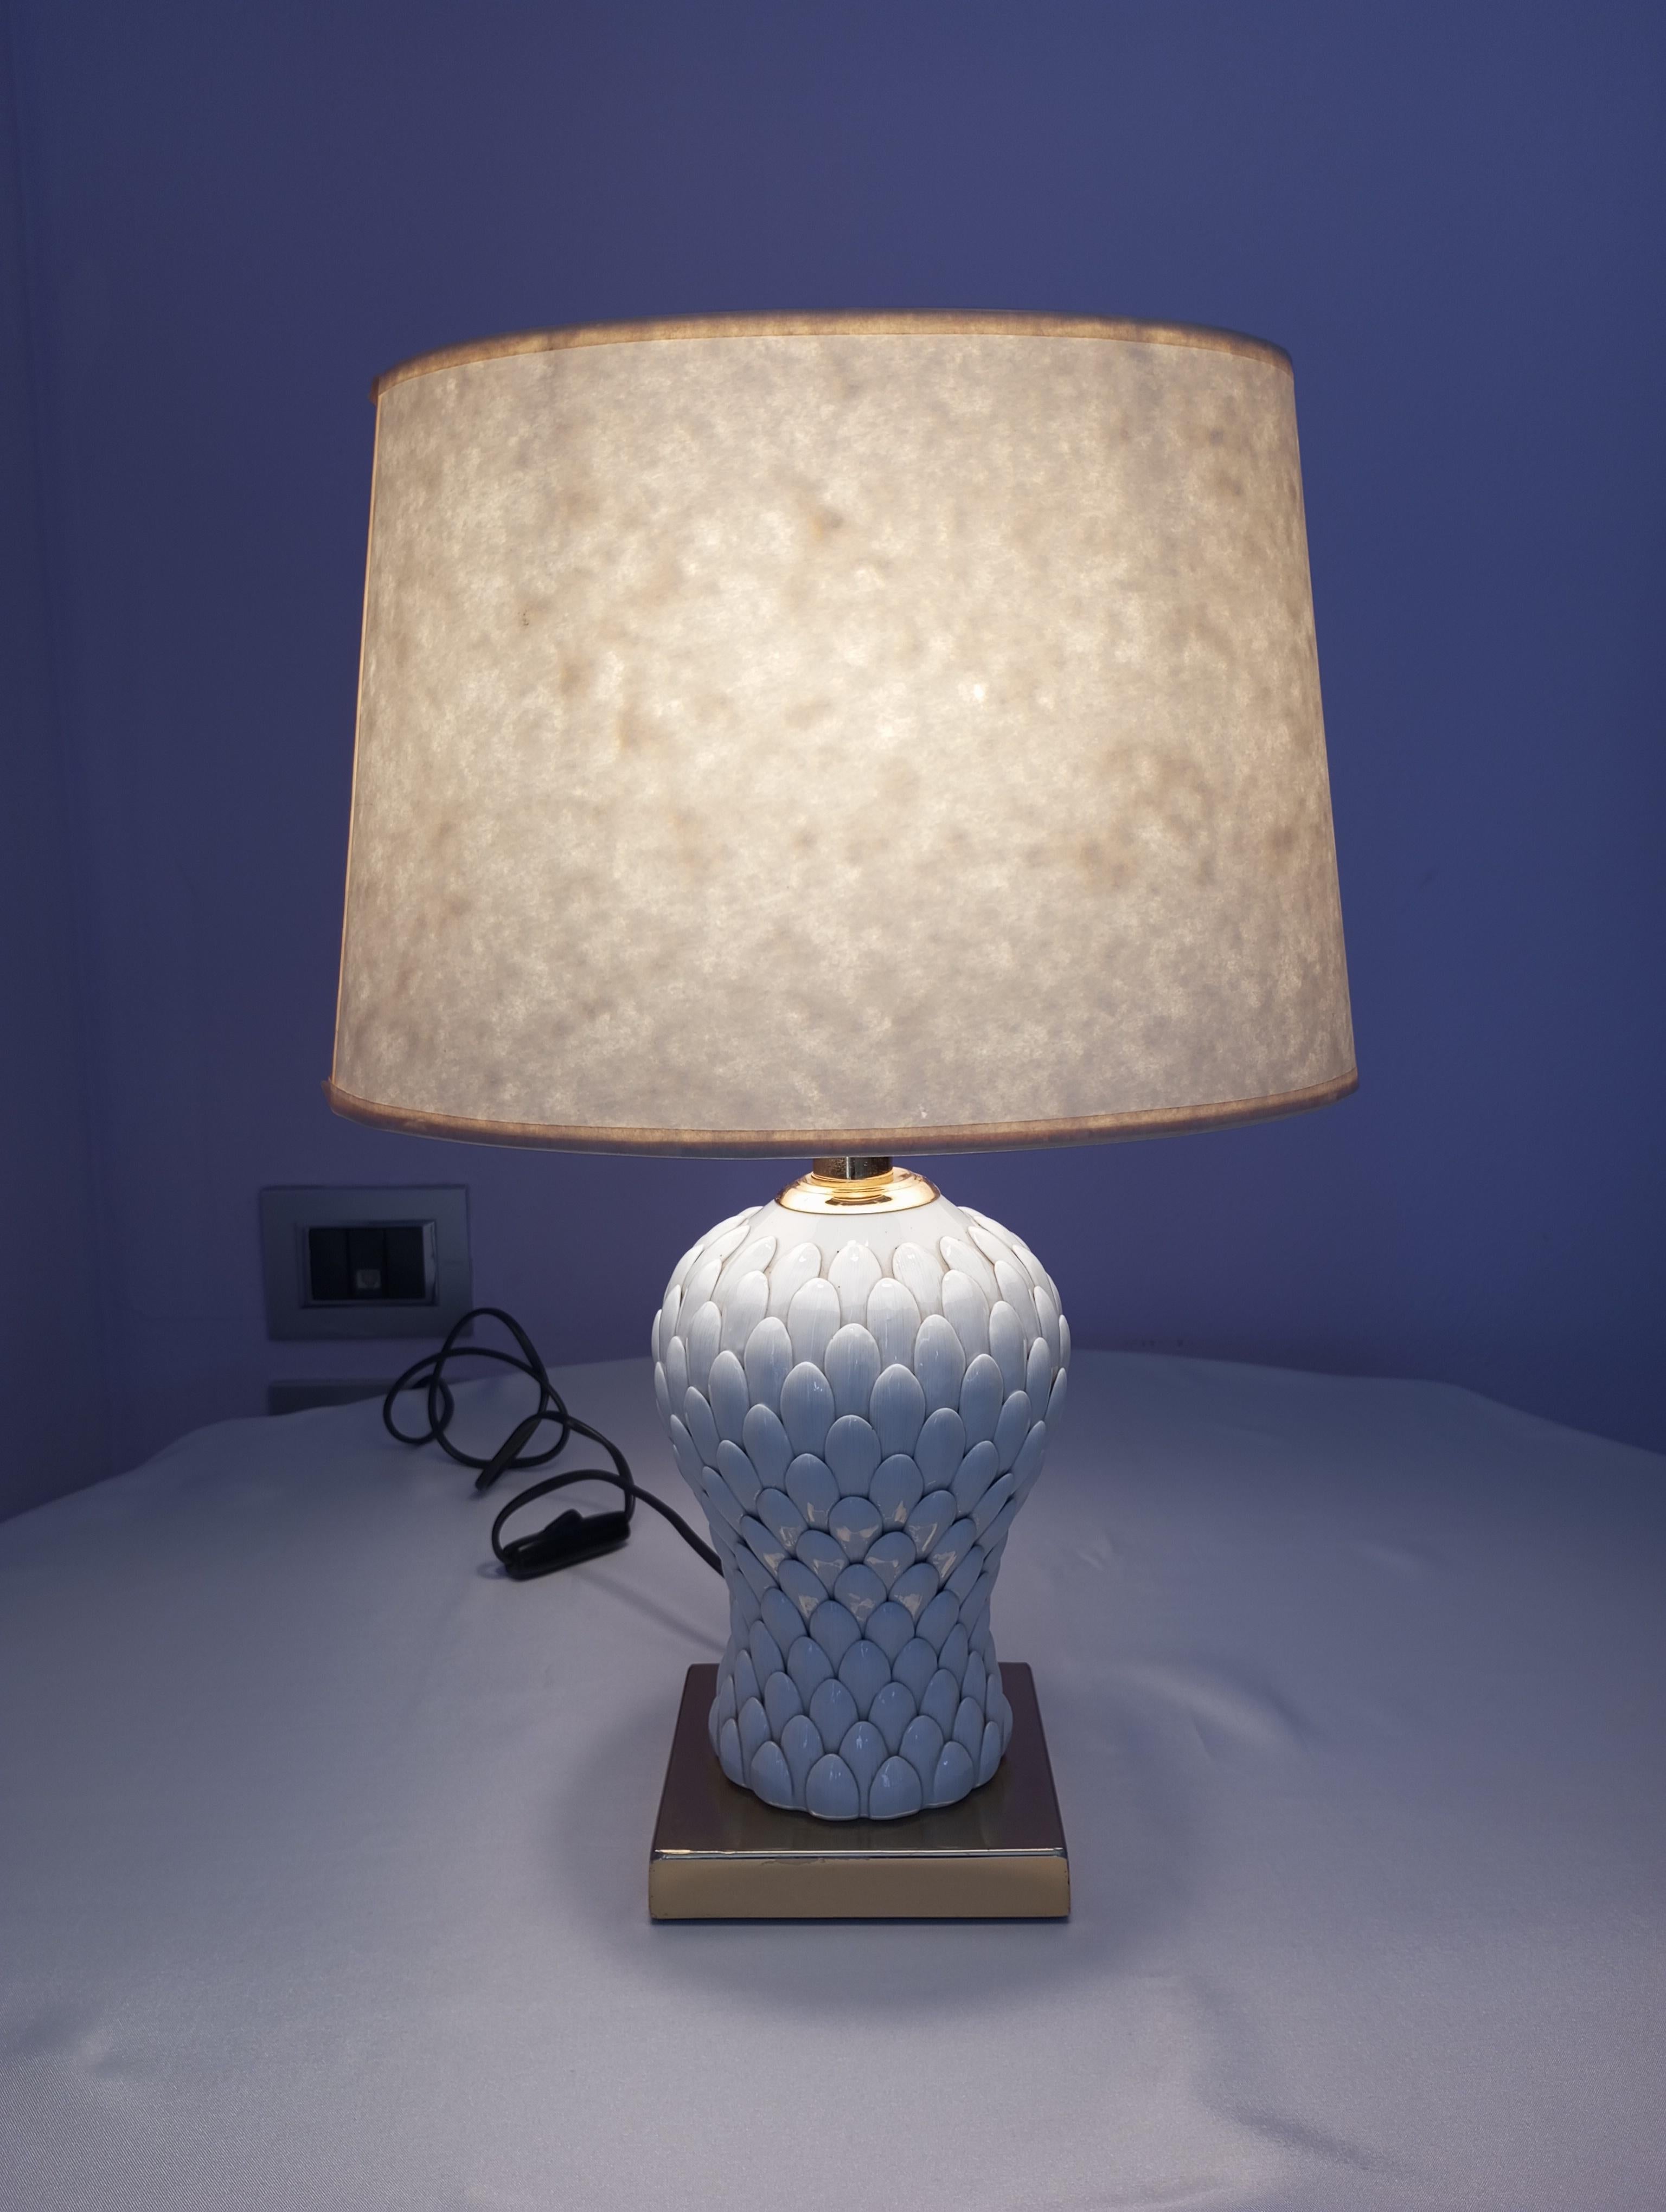 Table lamp composed of small 